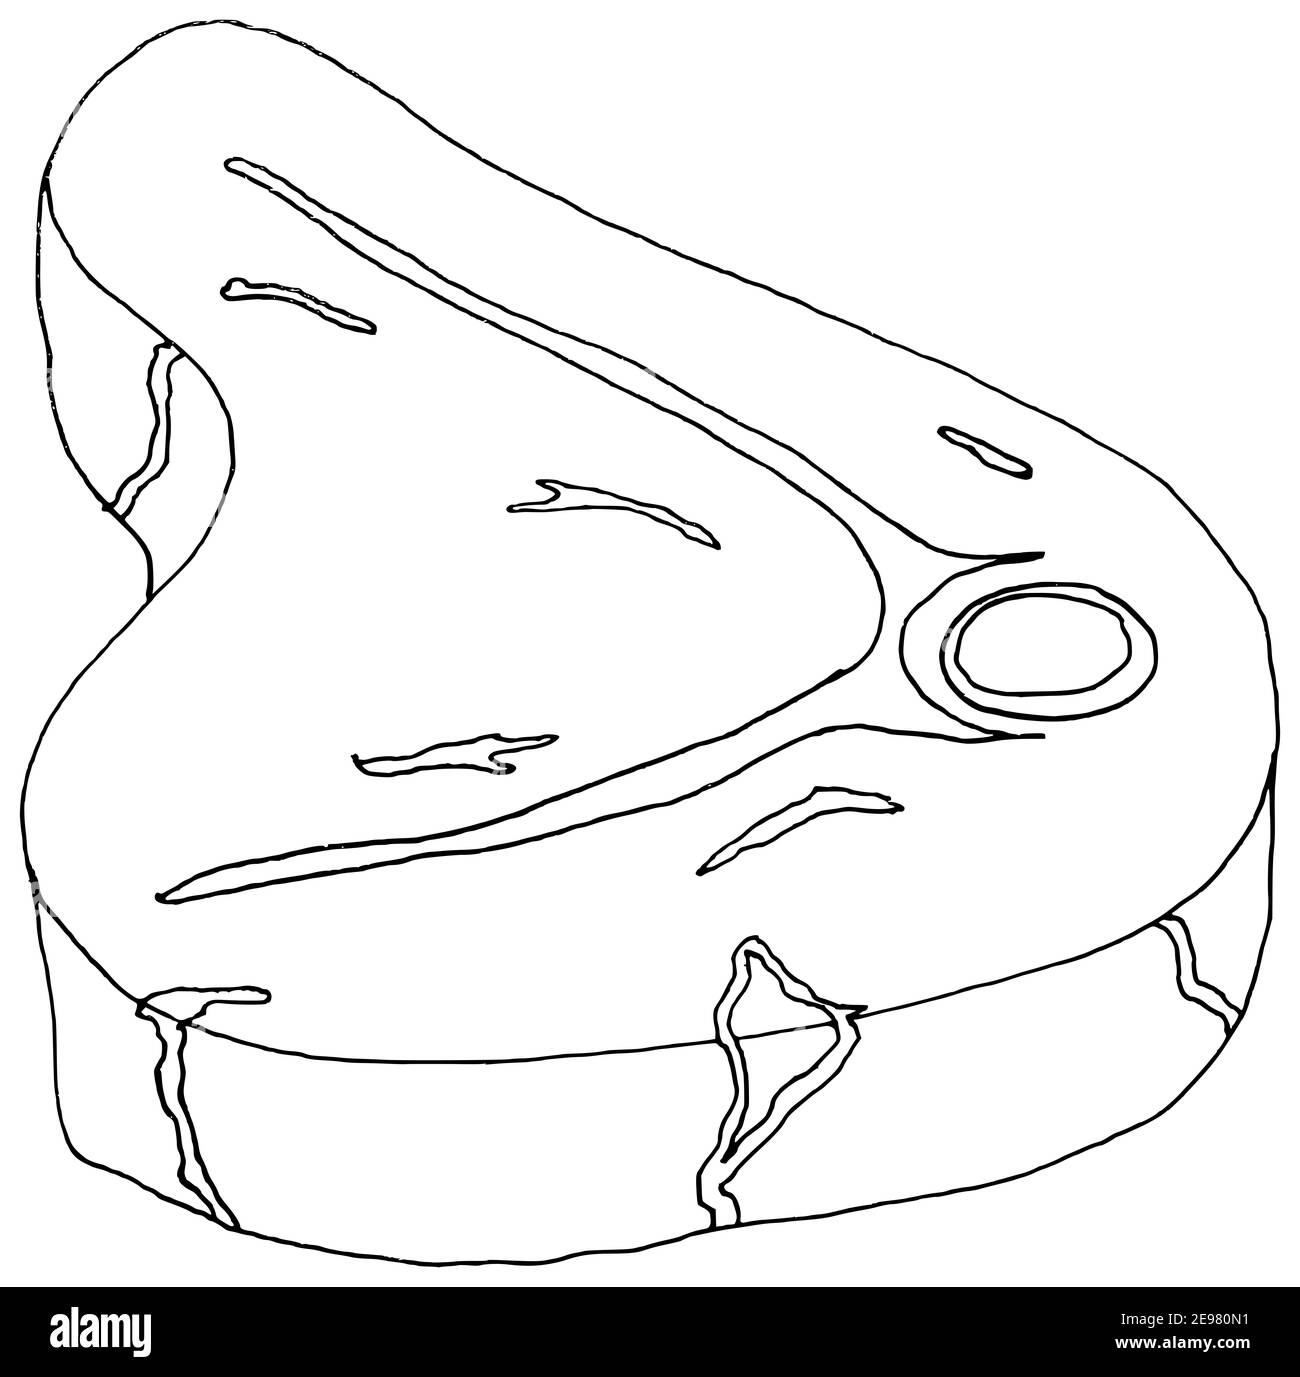 Vector of free hand drawing of beef steak no colored Stock Photo